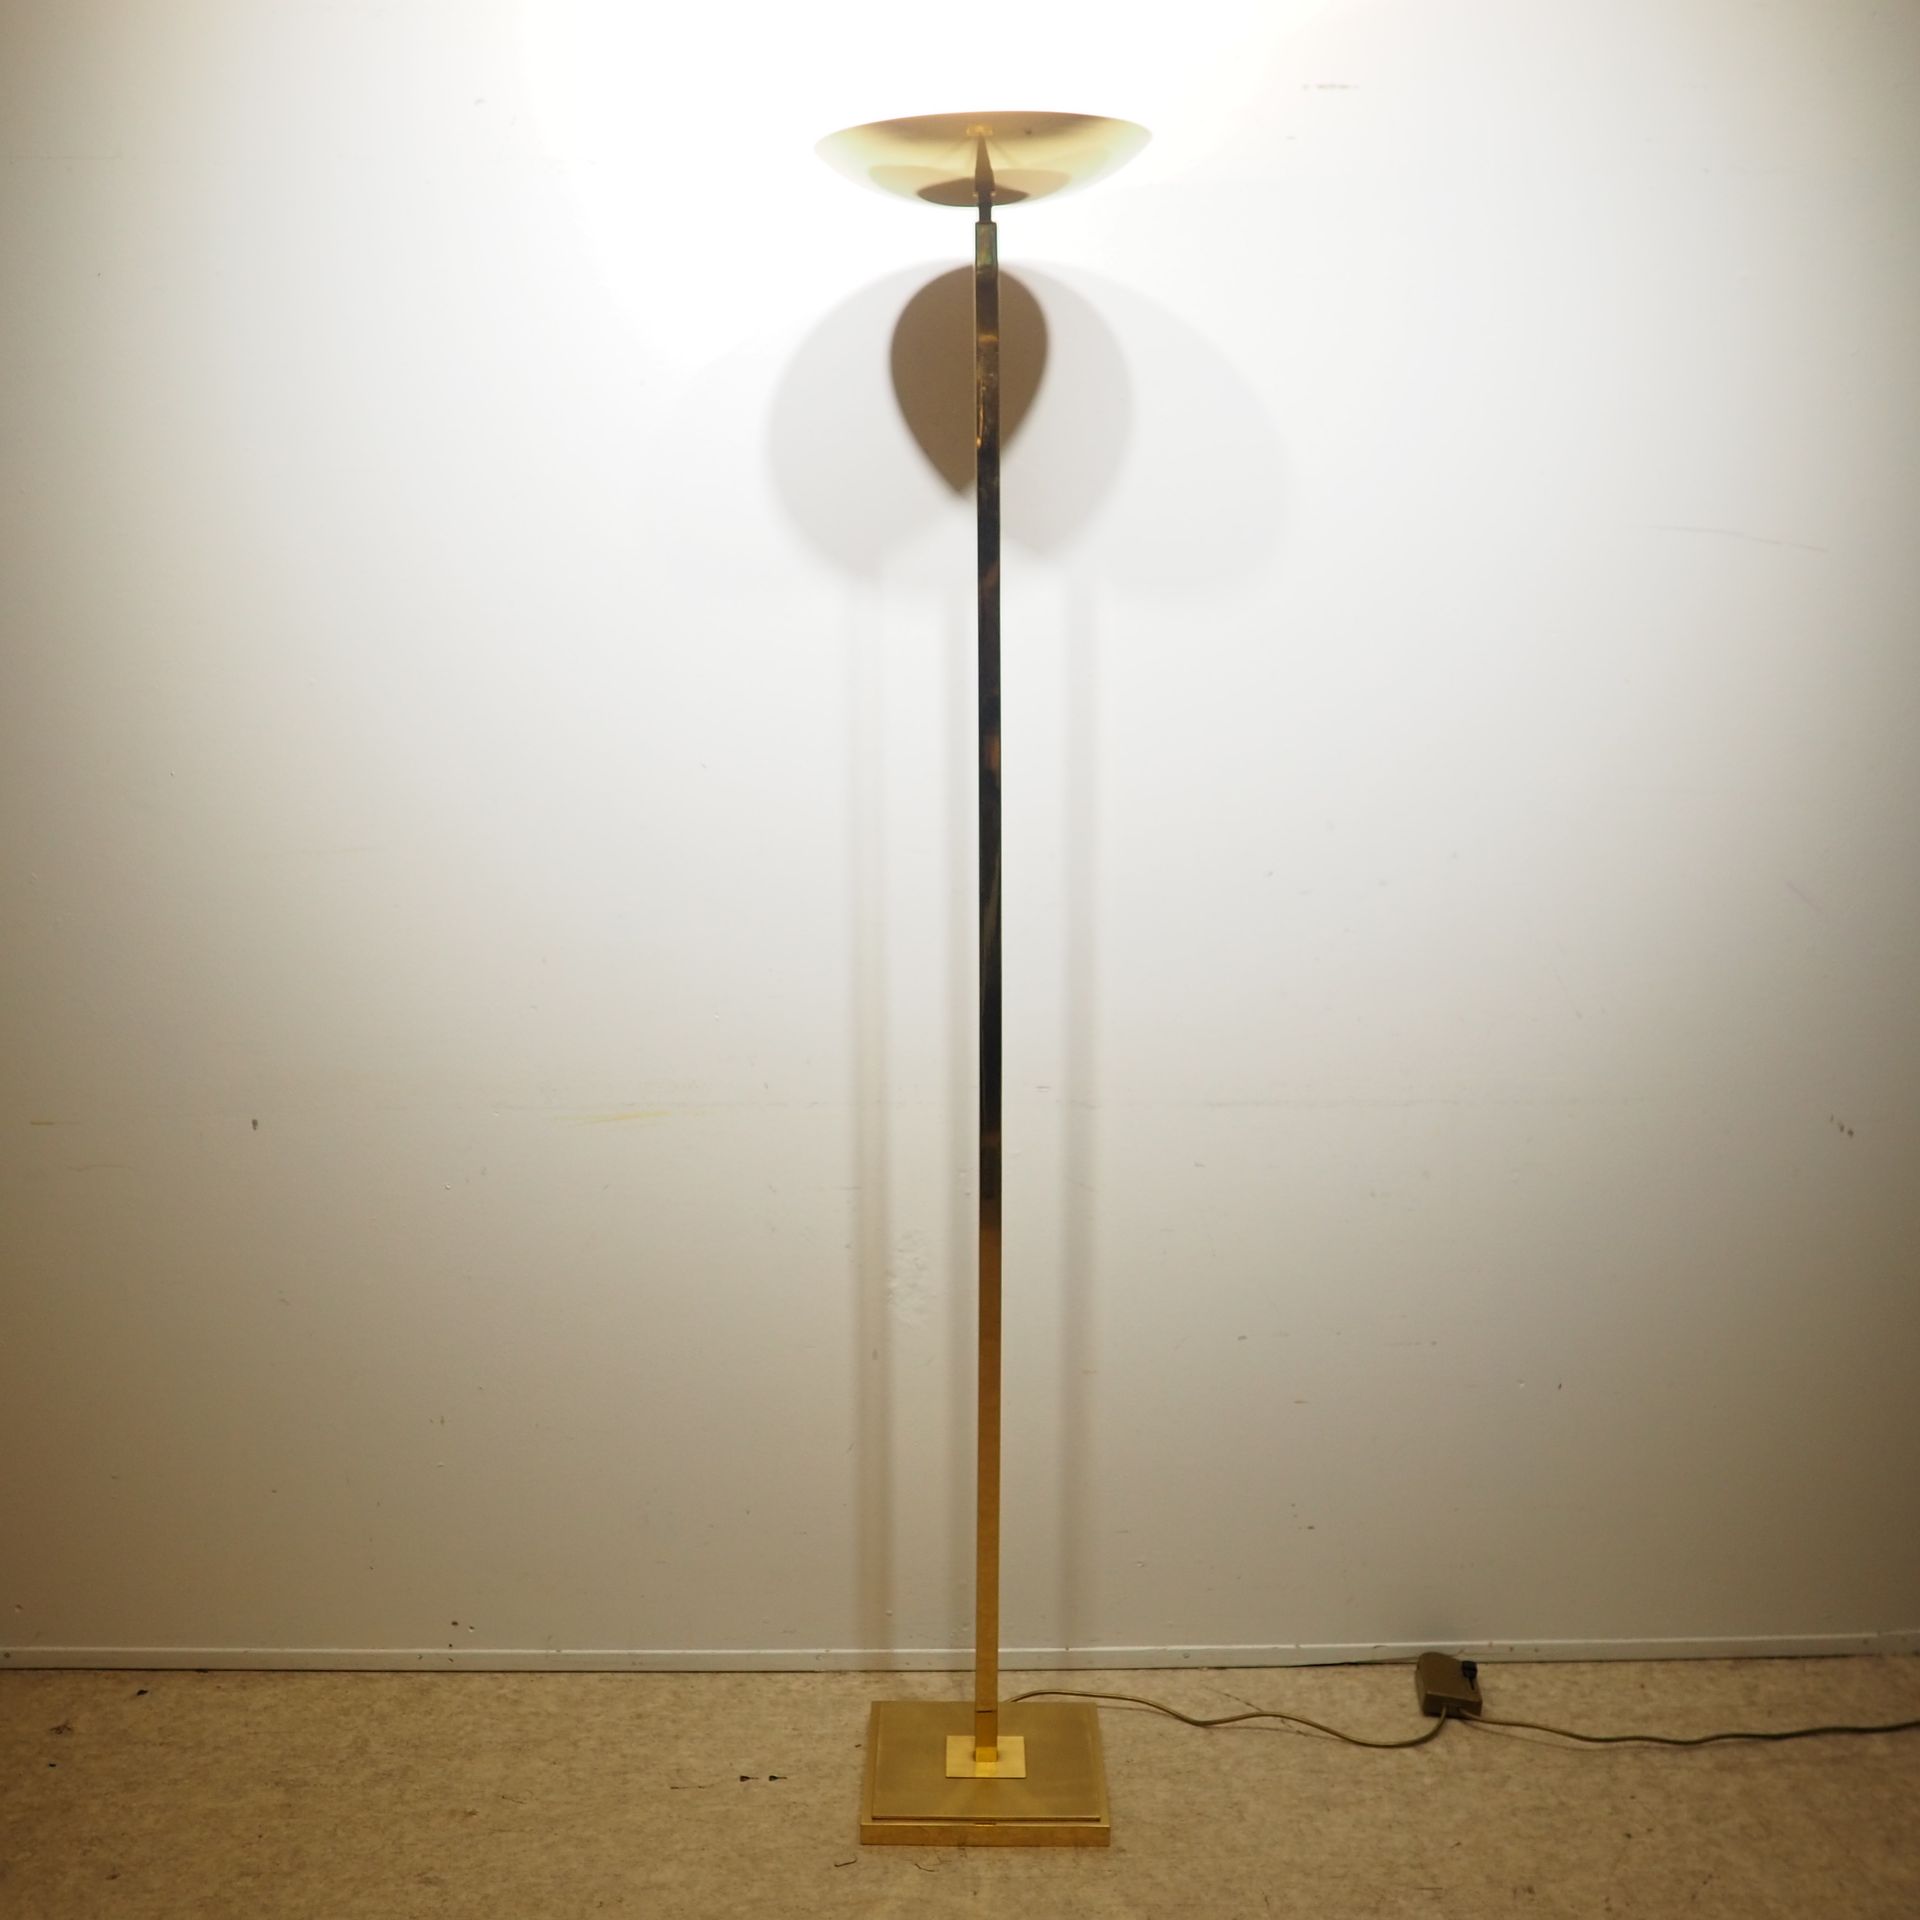 What Is The Mass Of A Floor Lamp?